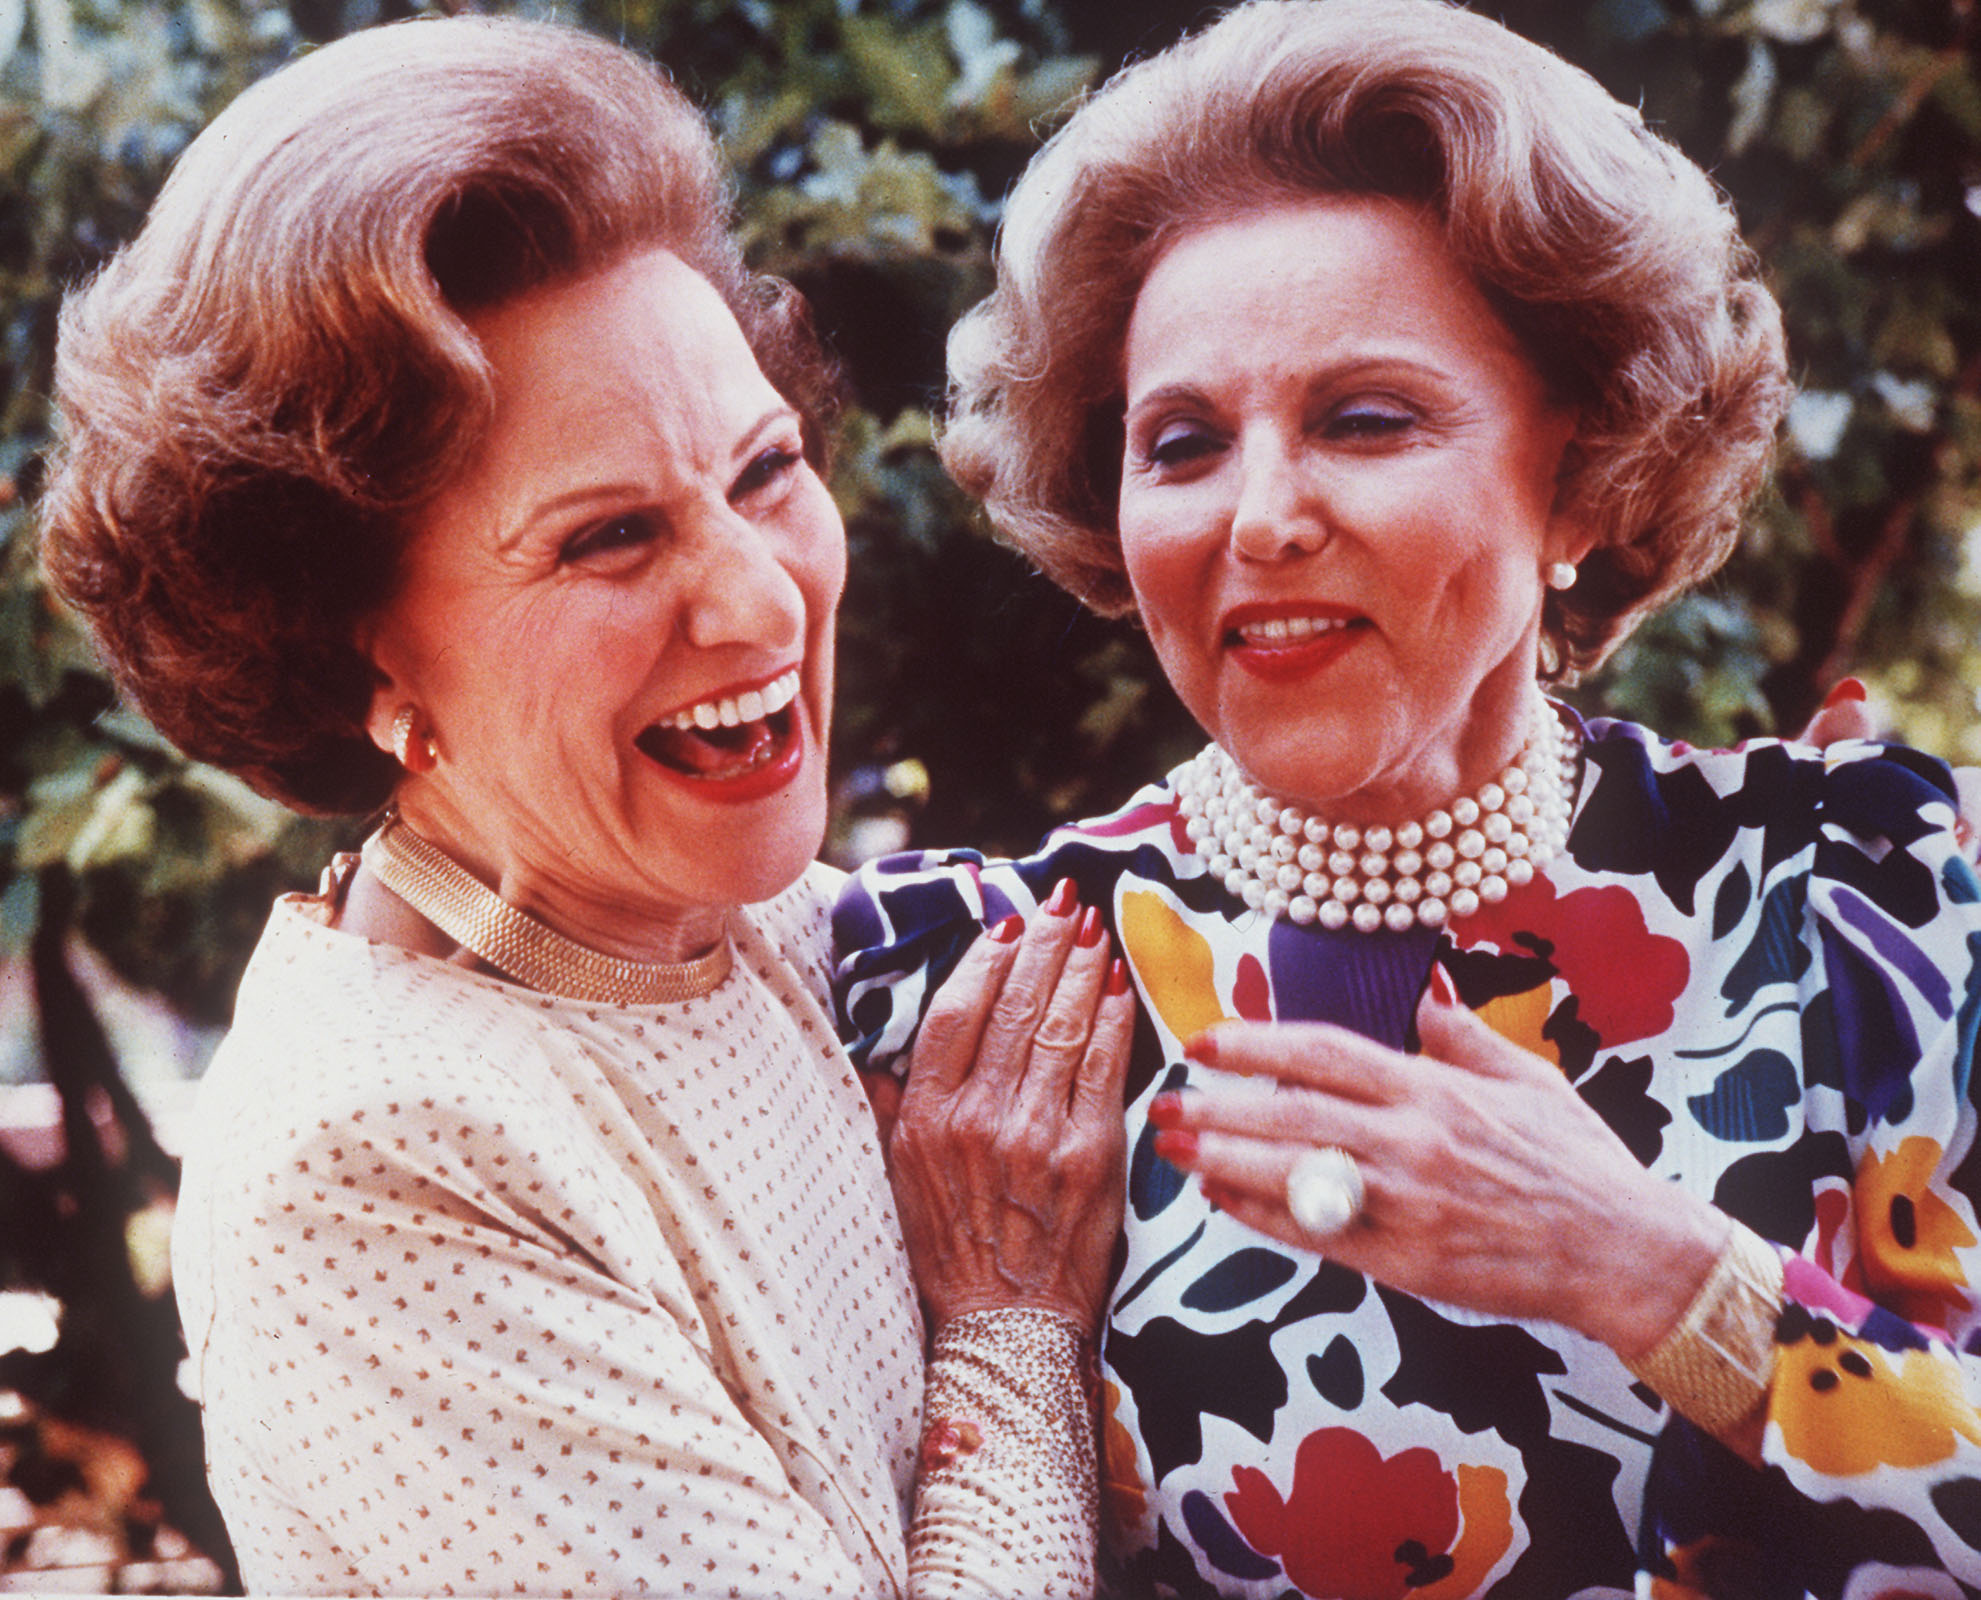 Advice columnist Ann Landers, right, and her twin sister Pauline, who also wrote an advice column as Dear Abby, are shown in a photo from June 1986, at their 50th high school reunion in Sioux City, Iowa.